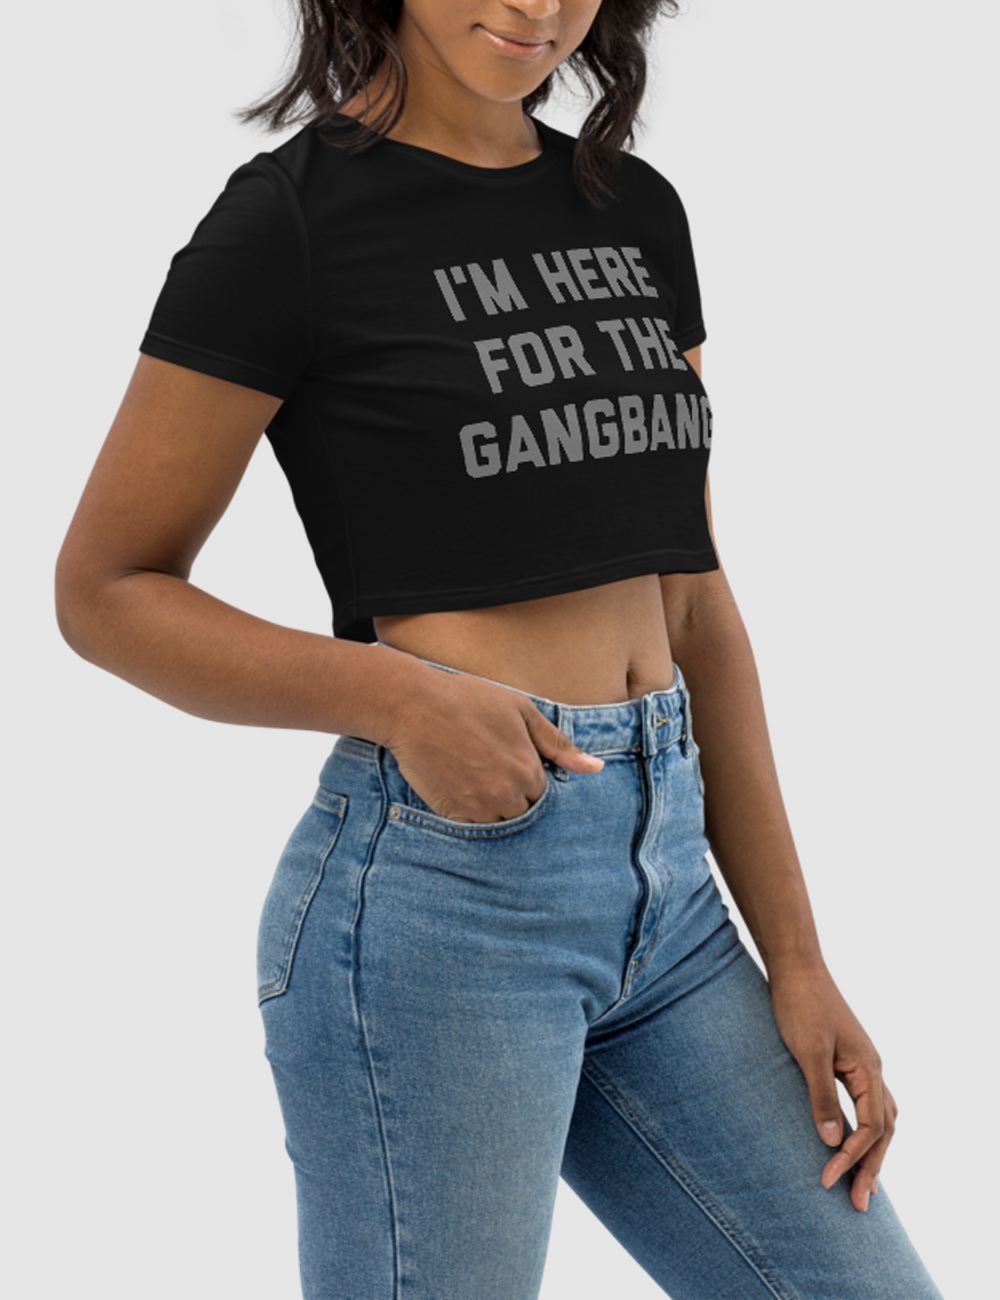 I'm Here For The Gangbang Women's Fitted Crop Top T-Shirt OniTakai